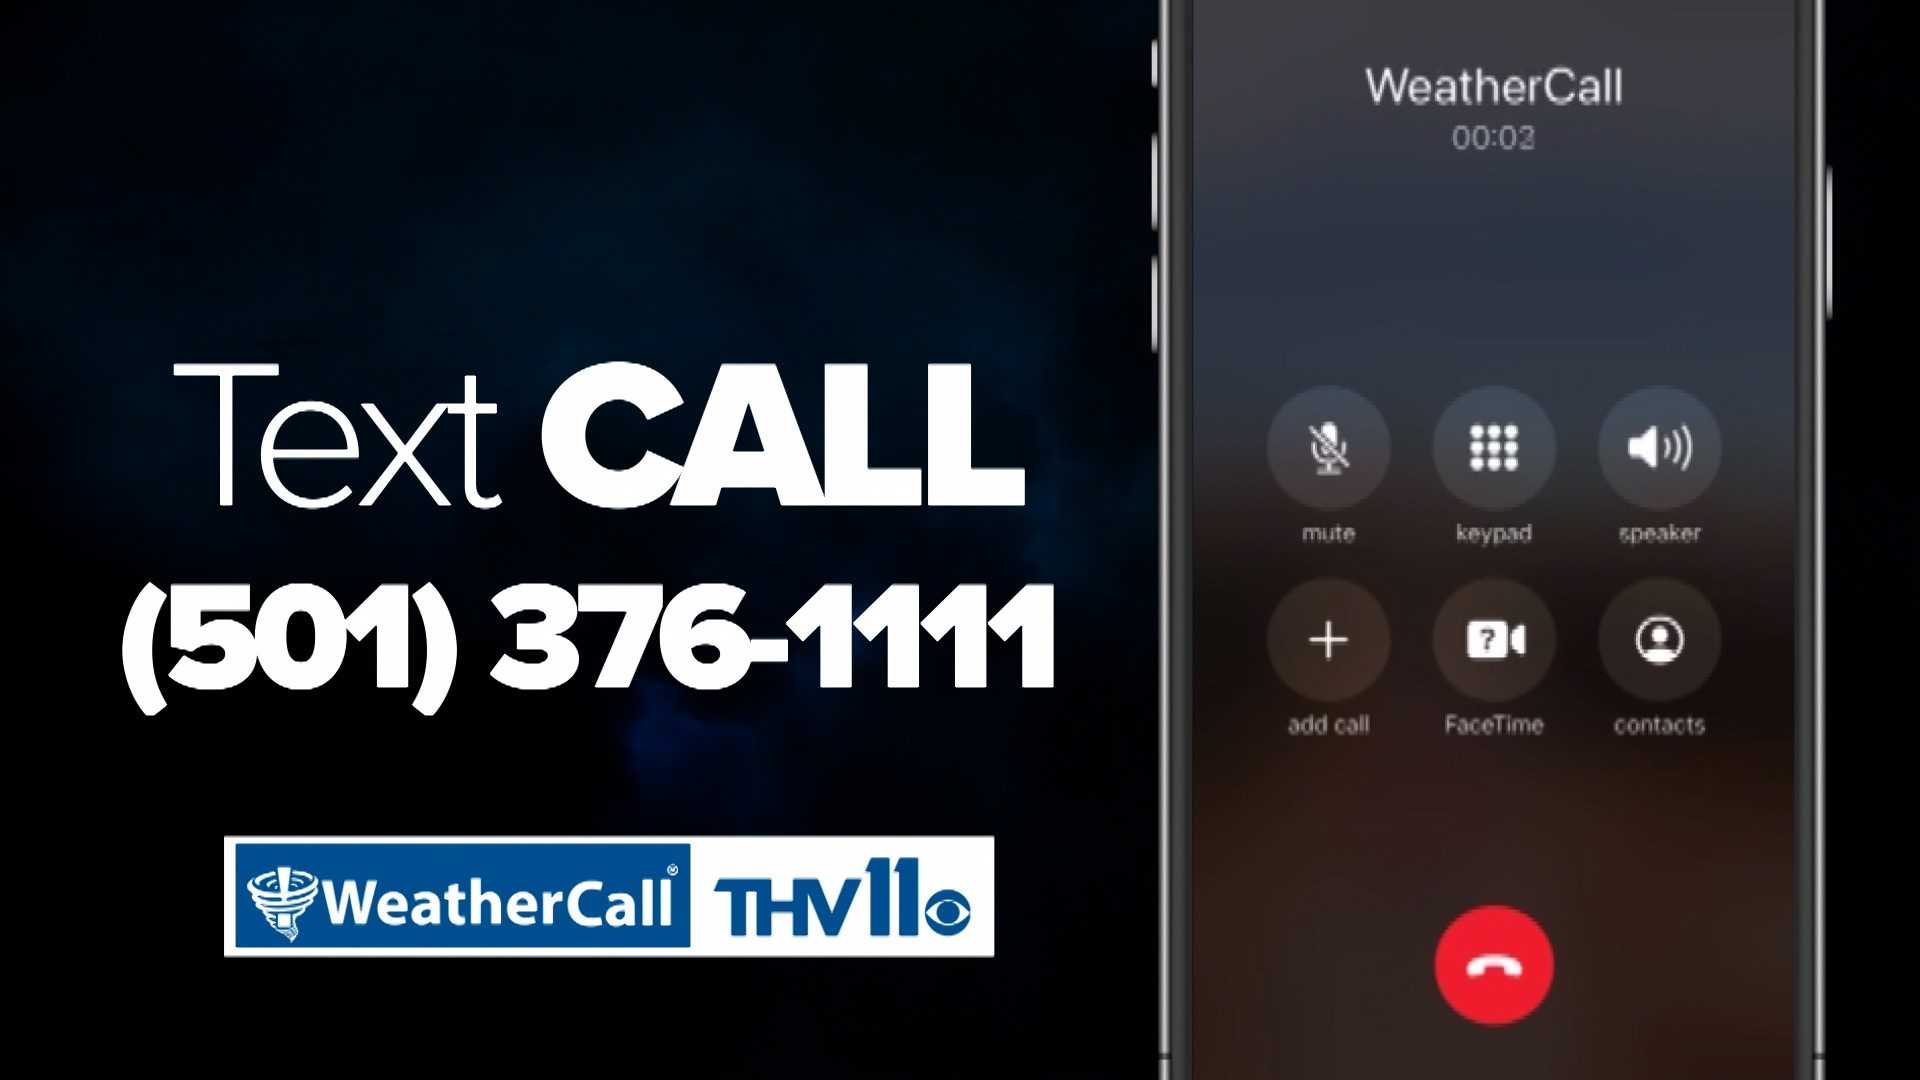 Tom Brannon informs you on how you can stay up-to-date on weather with Weather Call!